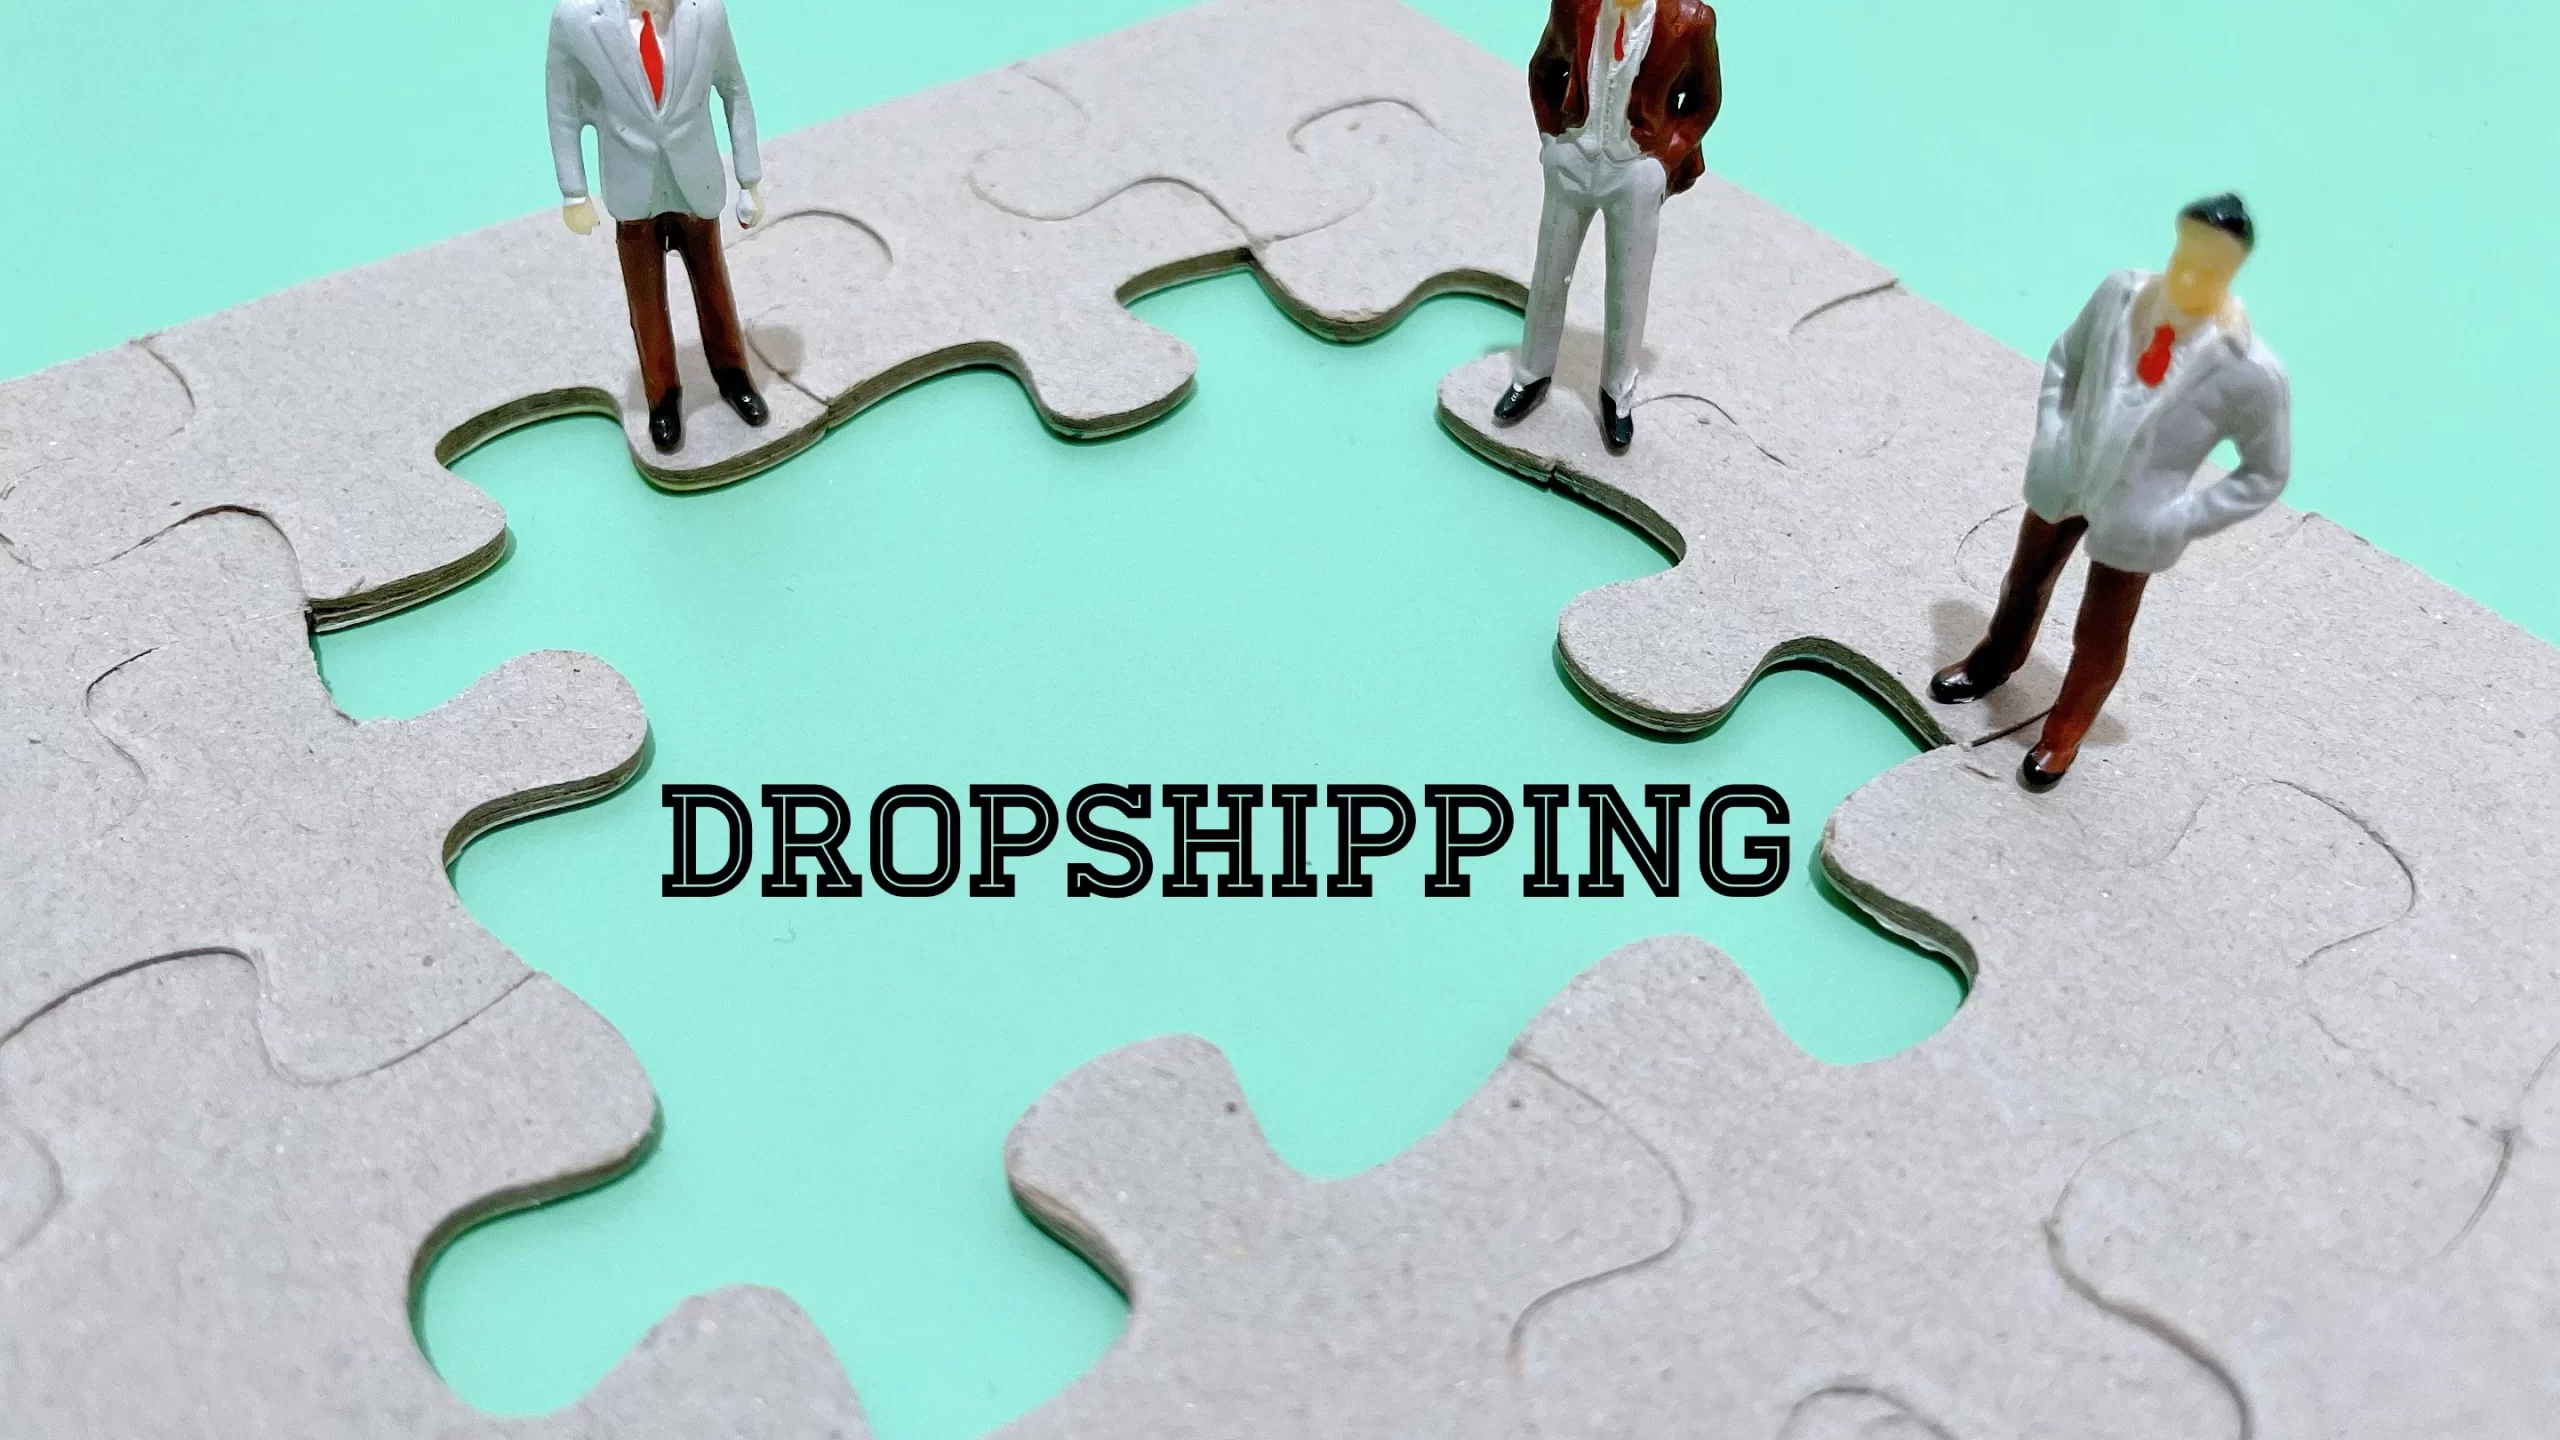 Figures standing on puzzle pieces with the word "dropshipping" in the middle